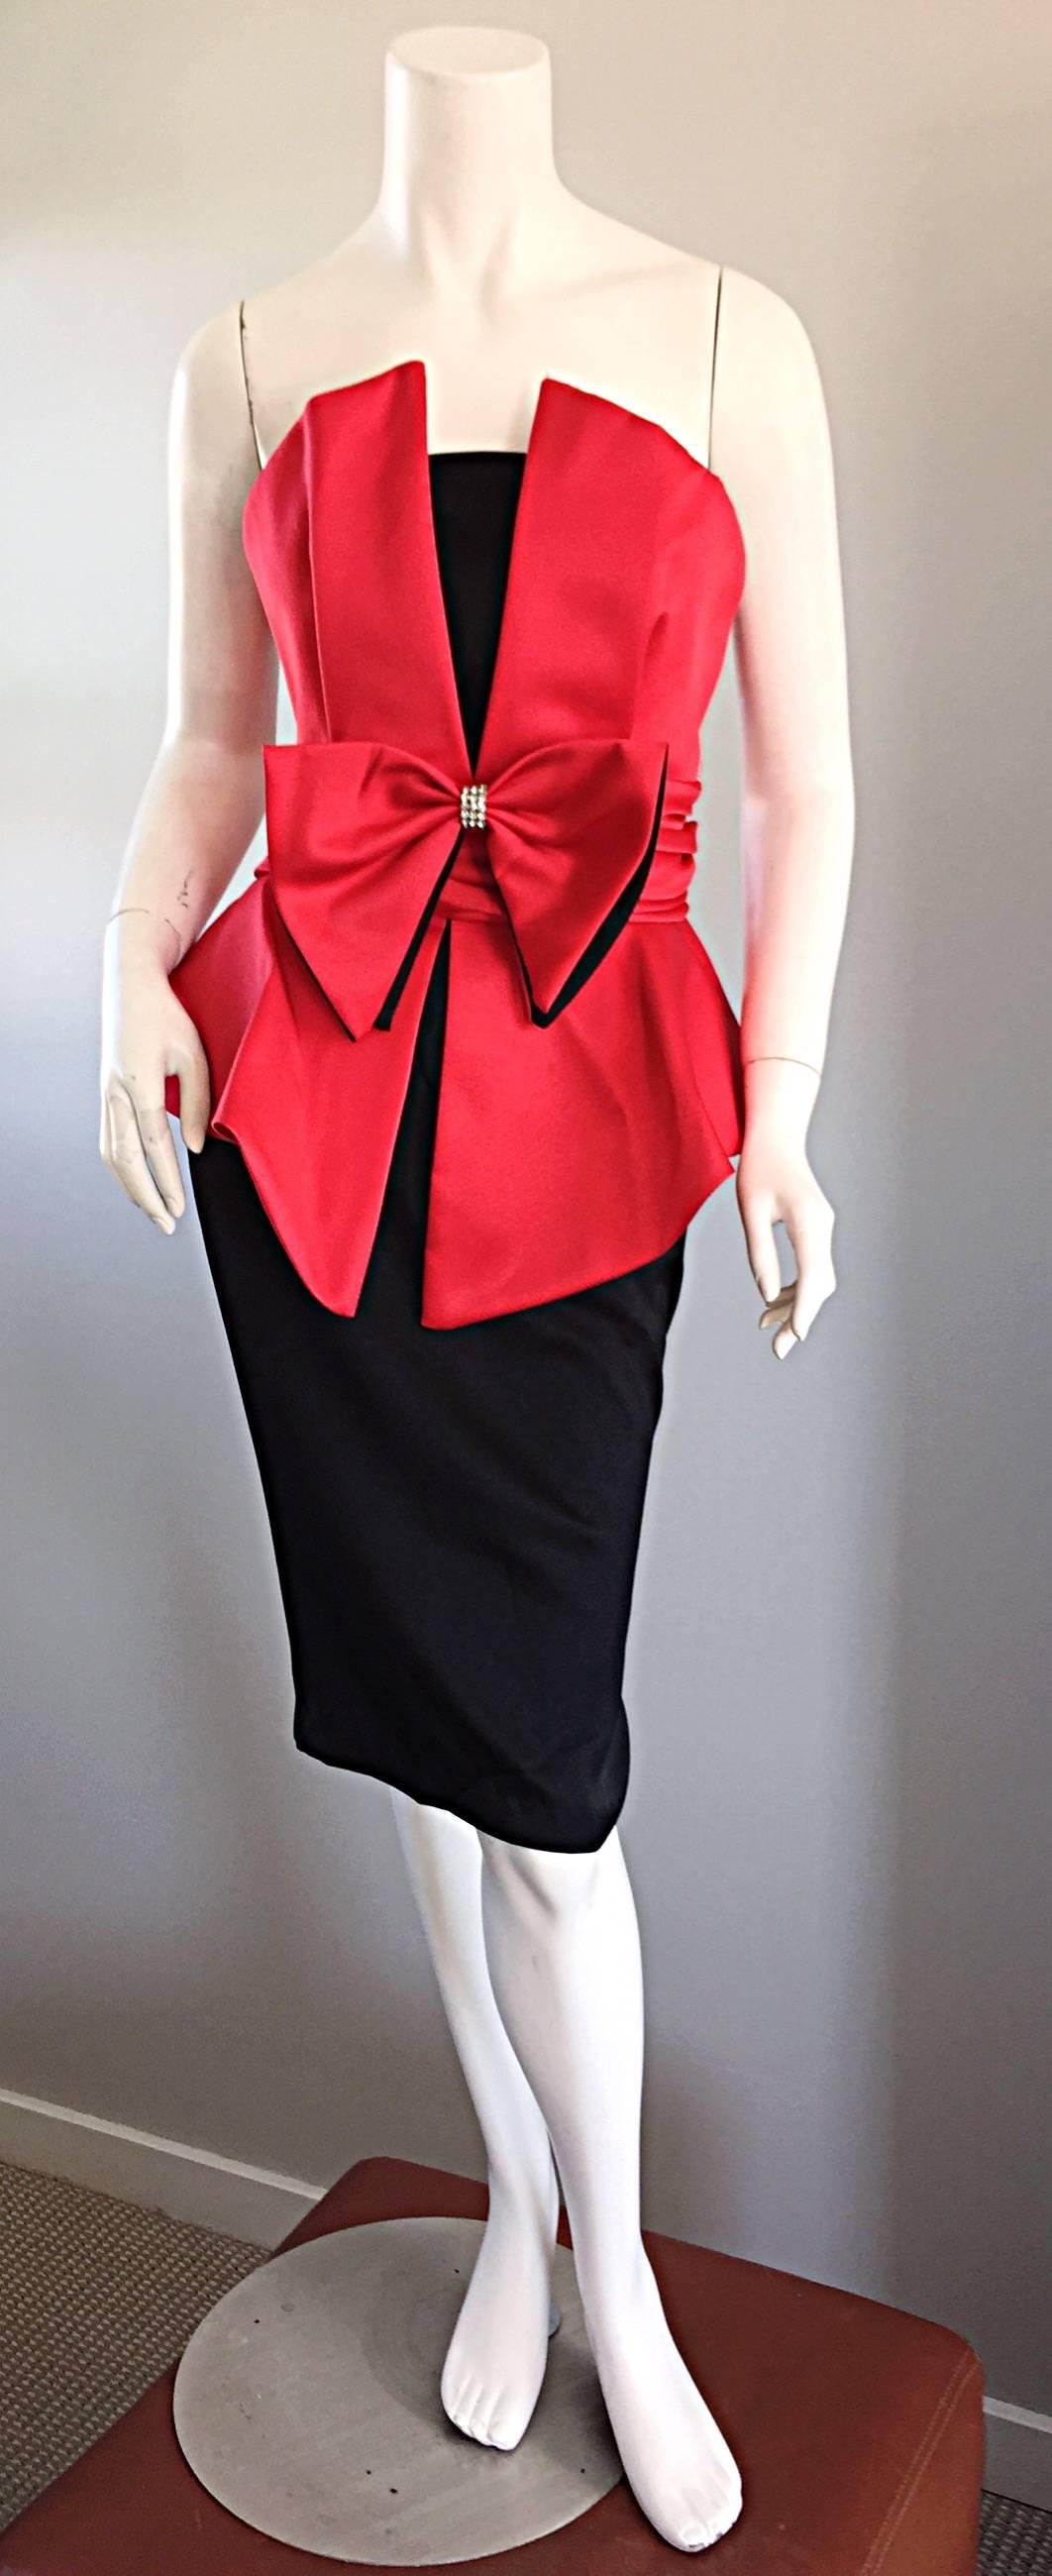 Chic vintage 80s red and black Avant Garde dress! Features convertible straps, that can easily be tucked in for a strapless look. Attached bow at waist, encrusted with rhinestones. Looks amazing on! In great condition. Approximately Size